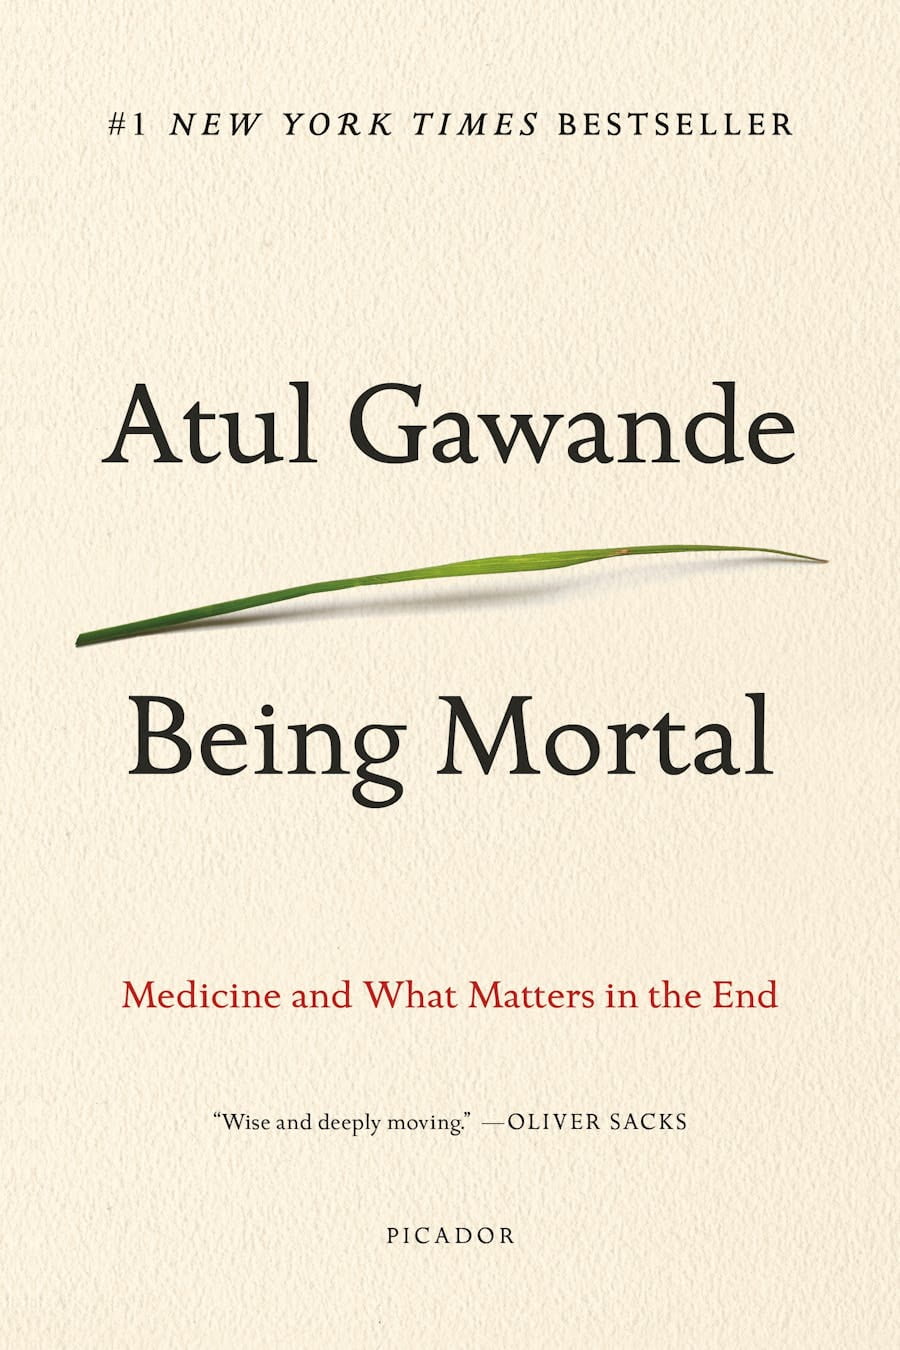 Book Cover of Gawande's Being Mortal